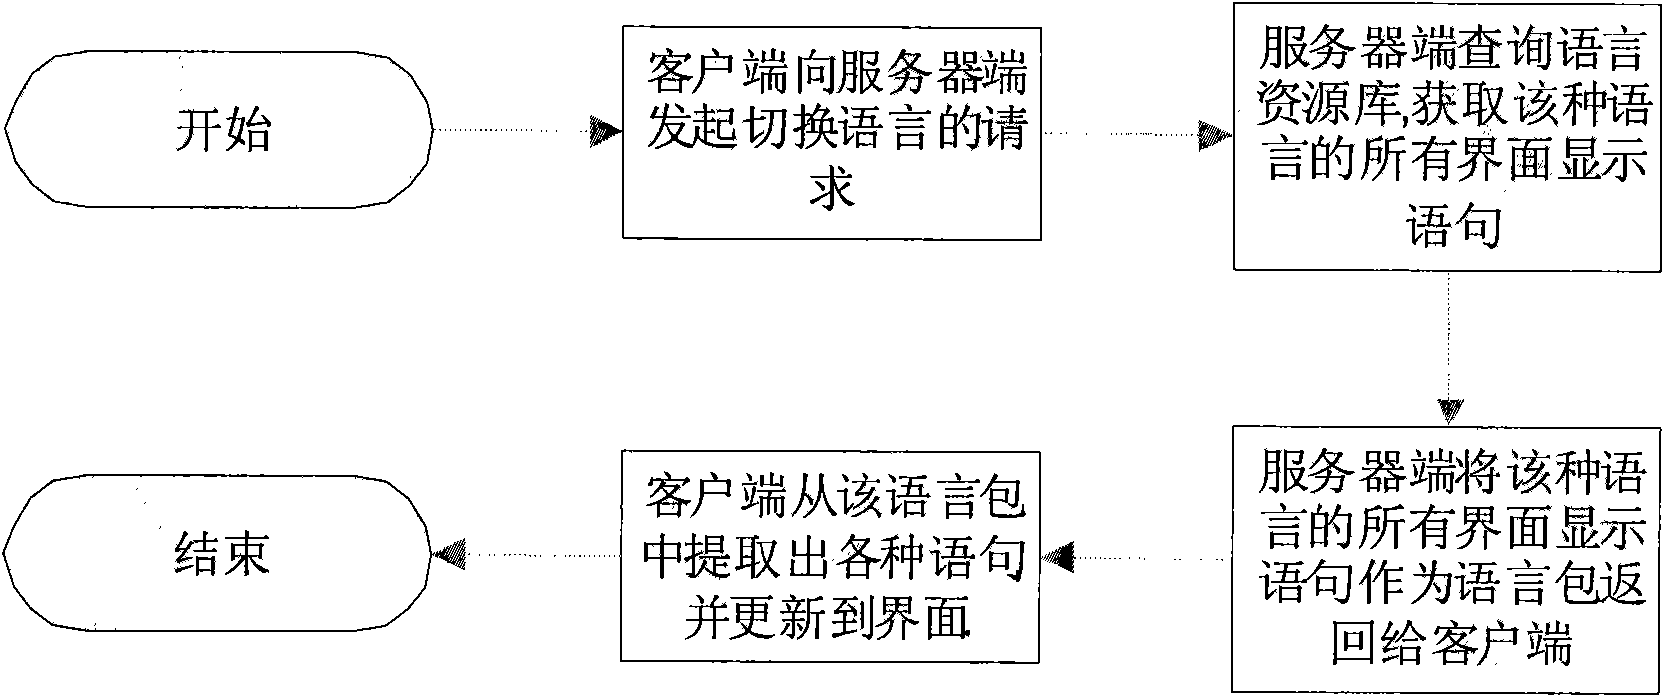 Method for flexibly supporting software multi-language version